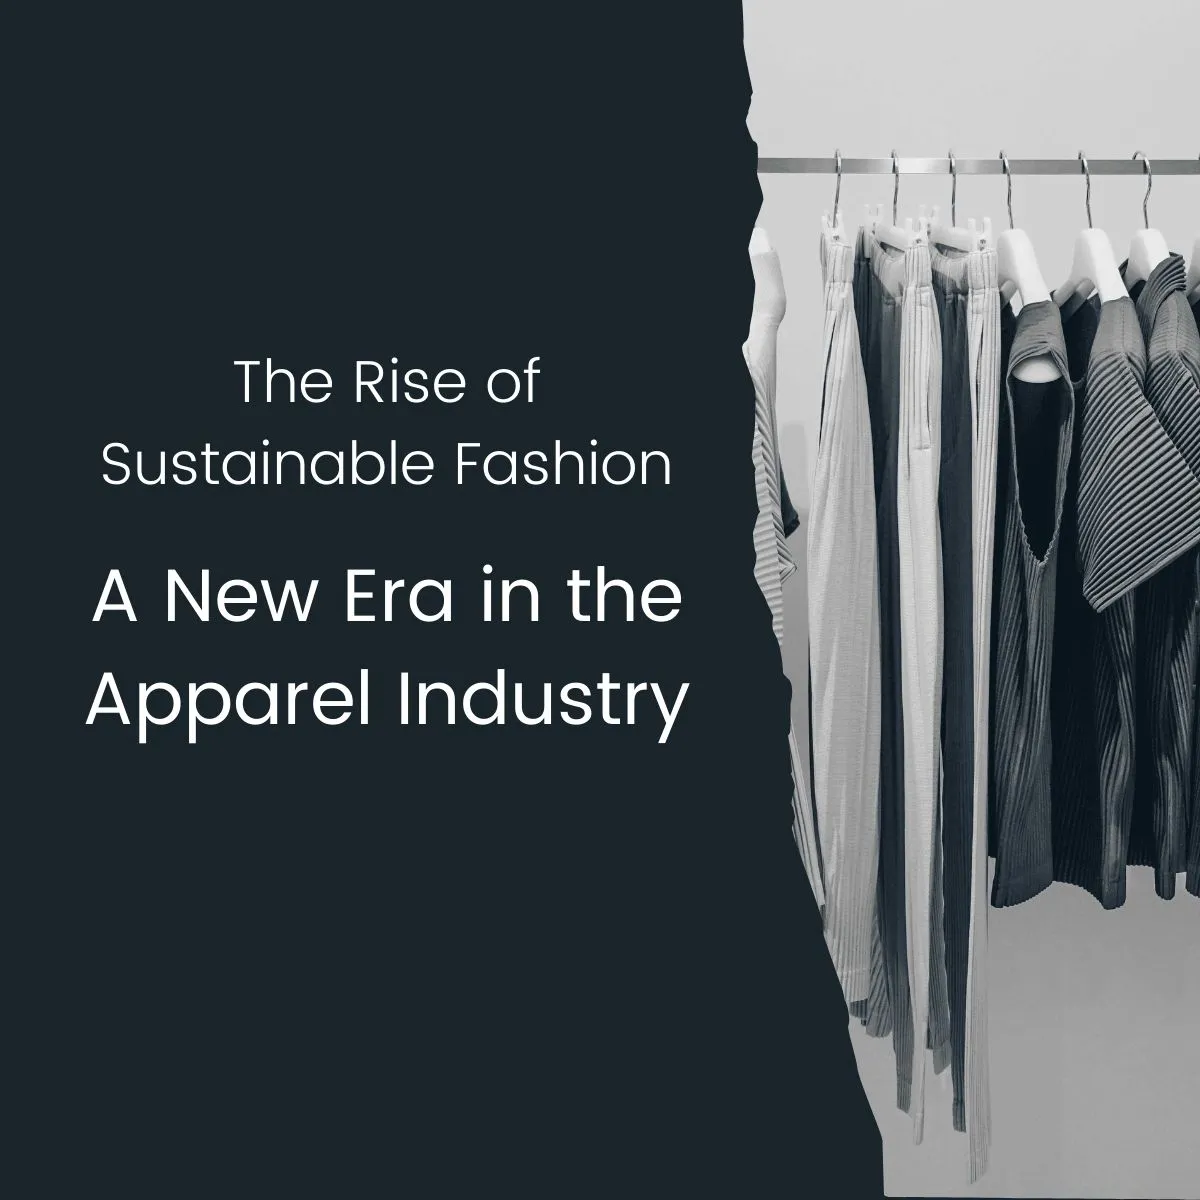 The Rise of Sustainable Fashion: A New Era in the Apparel Industry